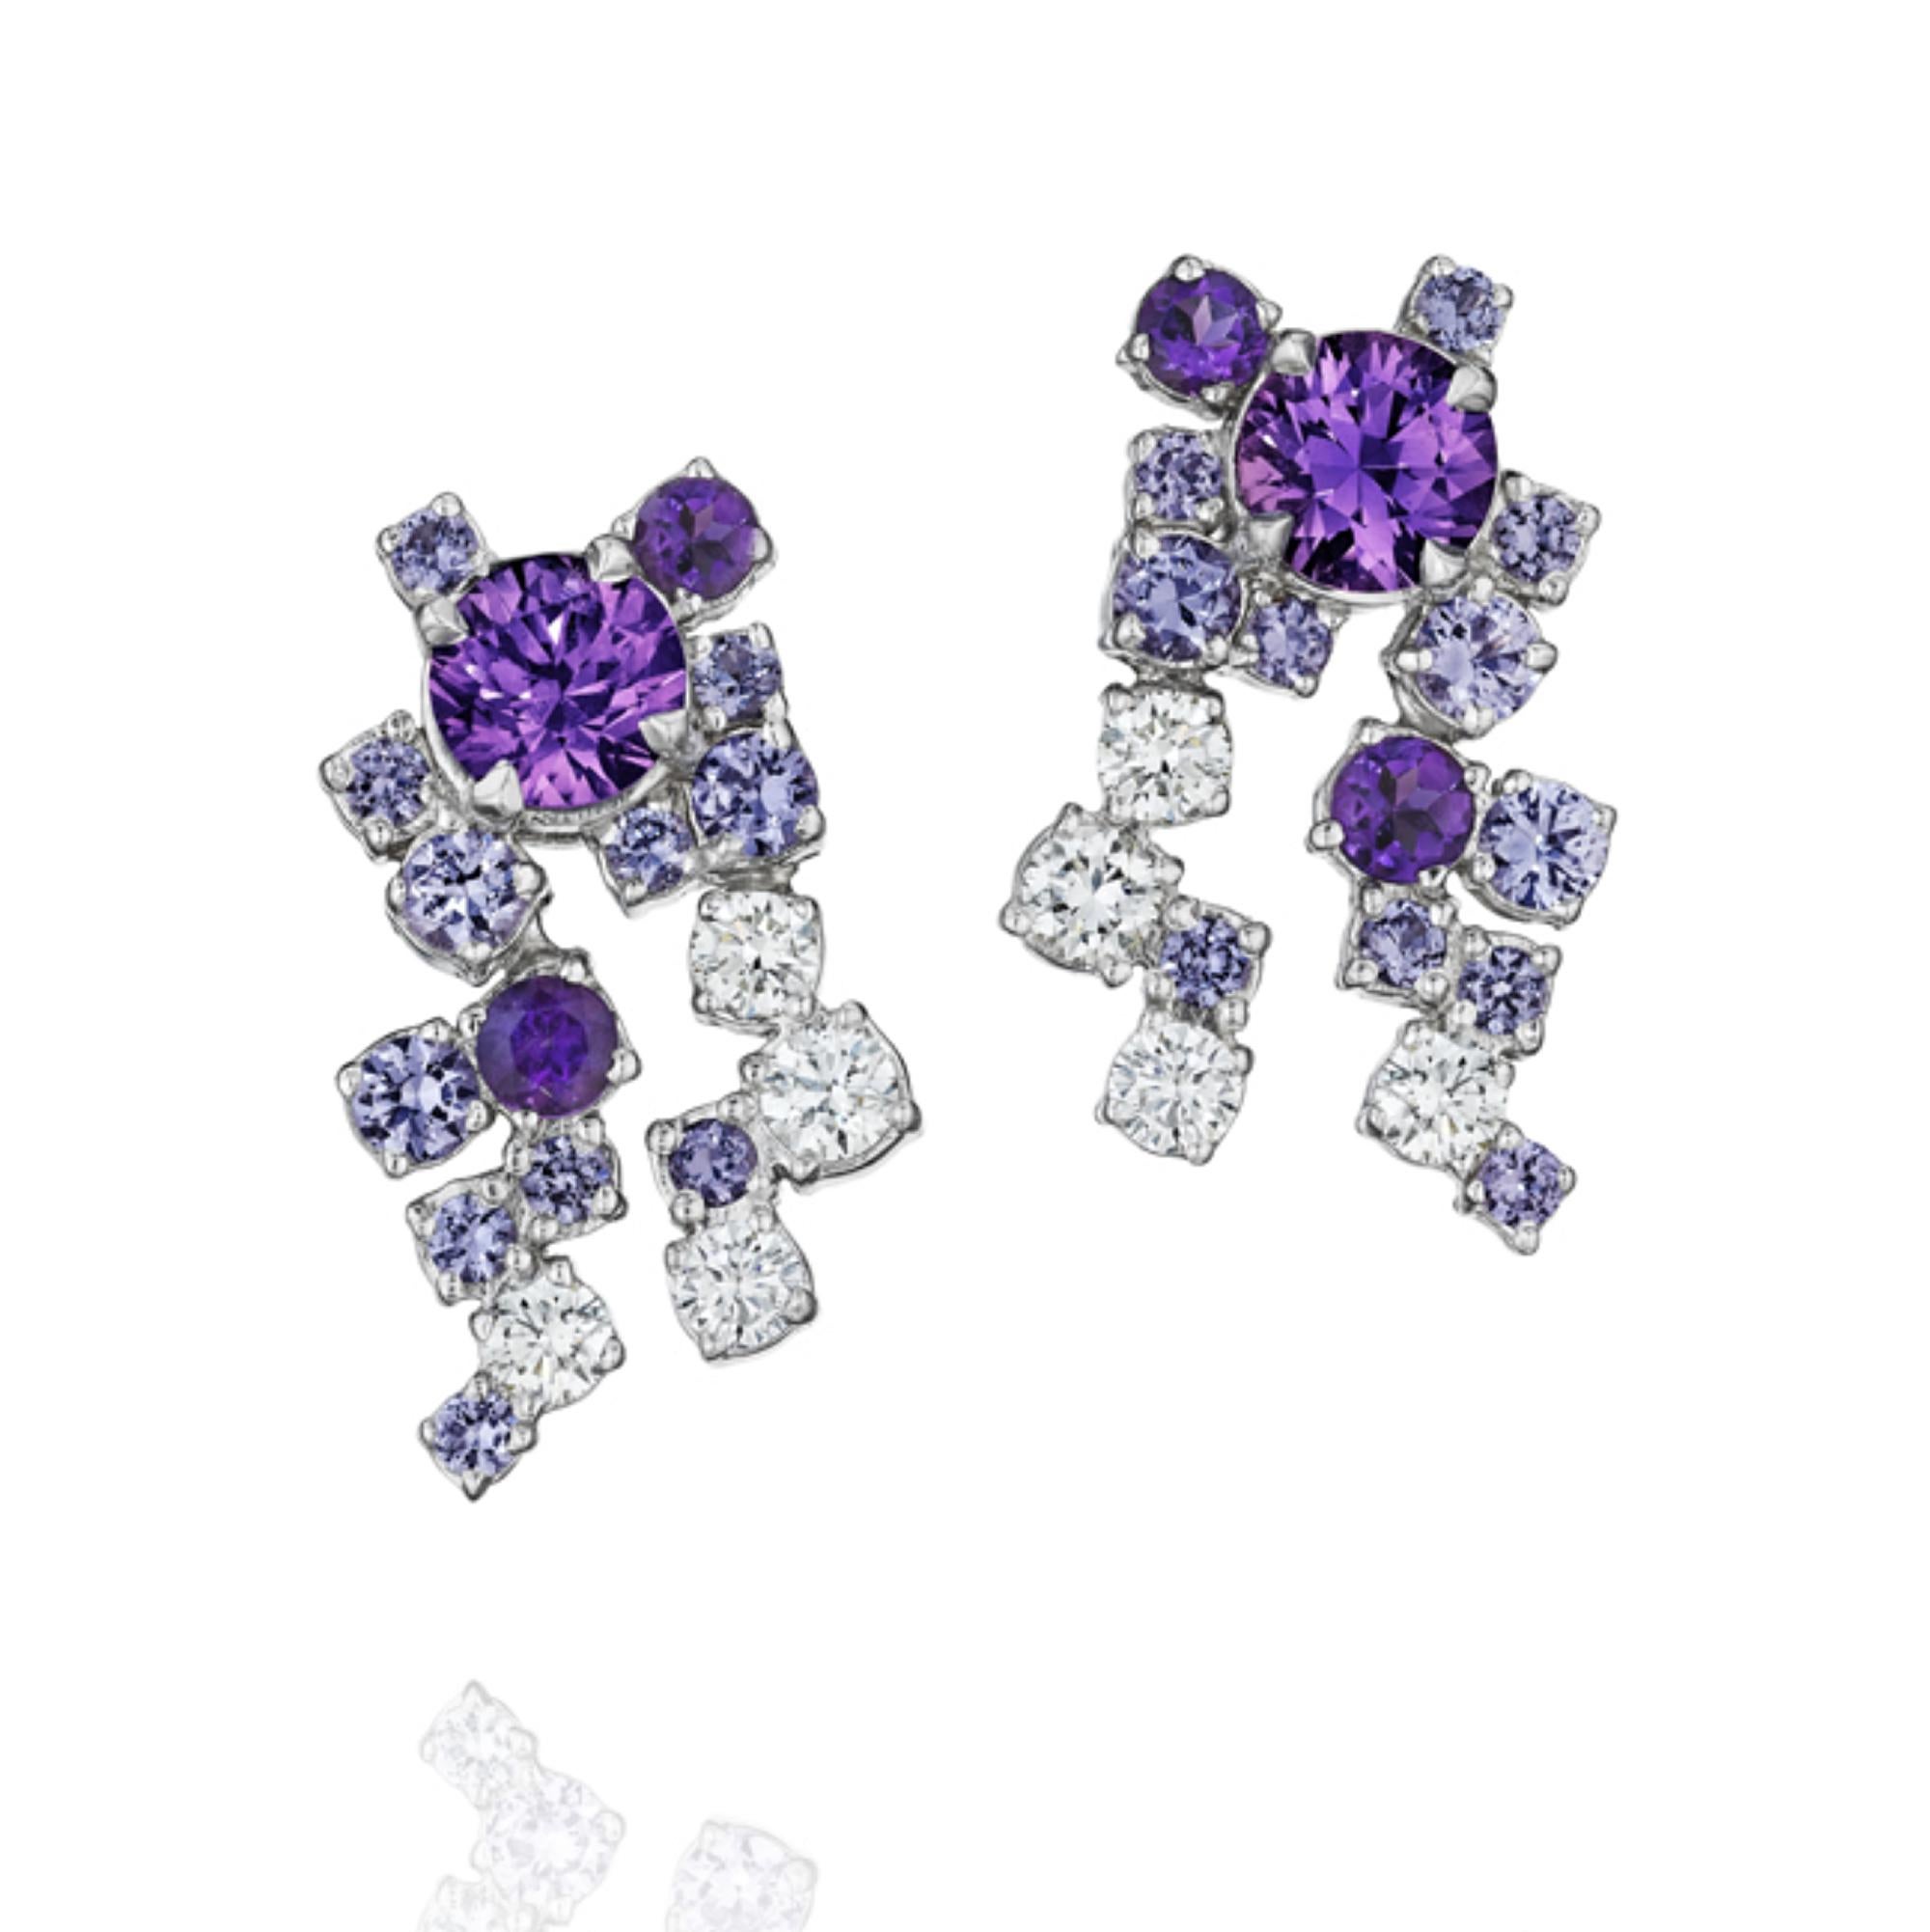 Specs: 18k white gold Melting Ice earrings with 1.23 carats of purple sapphires. 

Story: The Melting Ice collection by MadStone designer Kerri Halpern draws influence from its colorful gemstones creating playful designs.